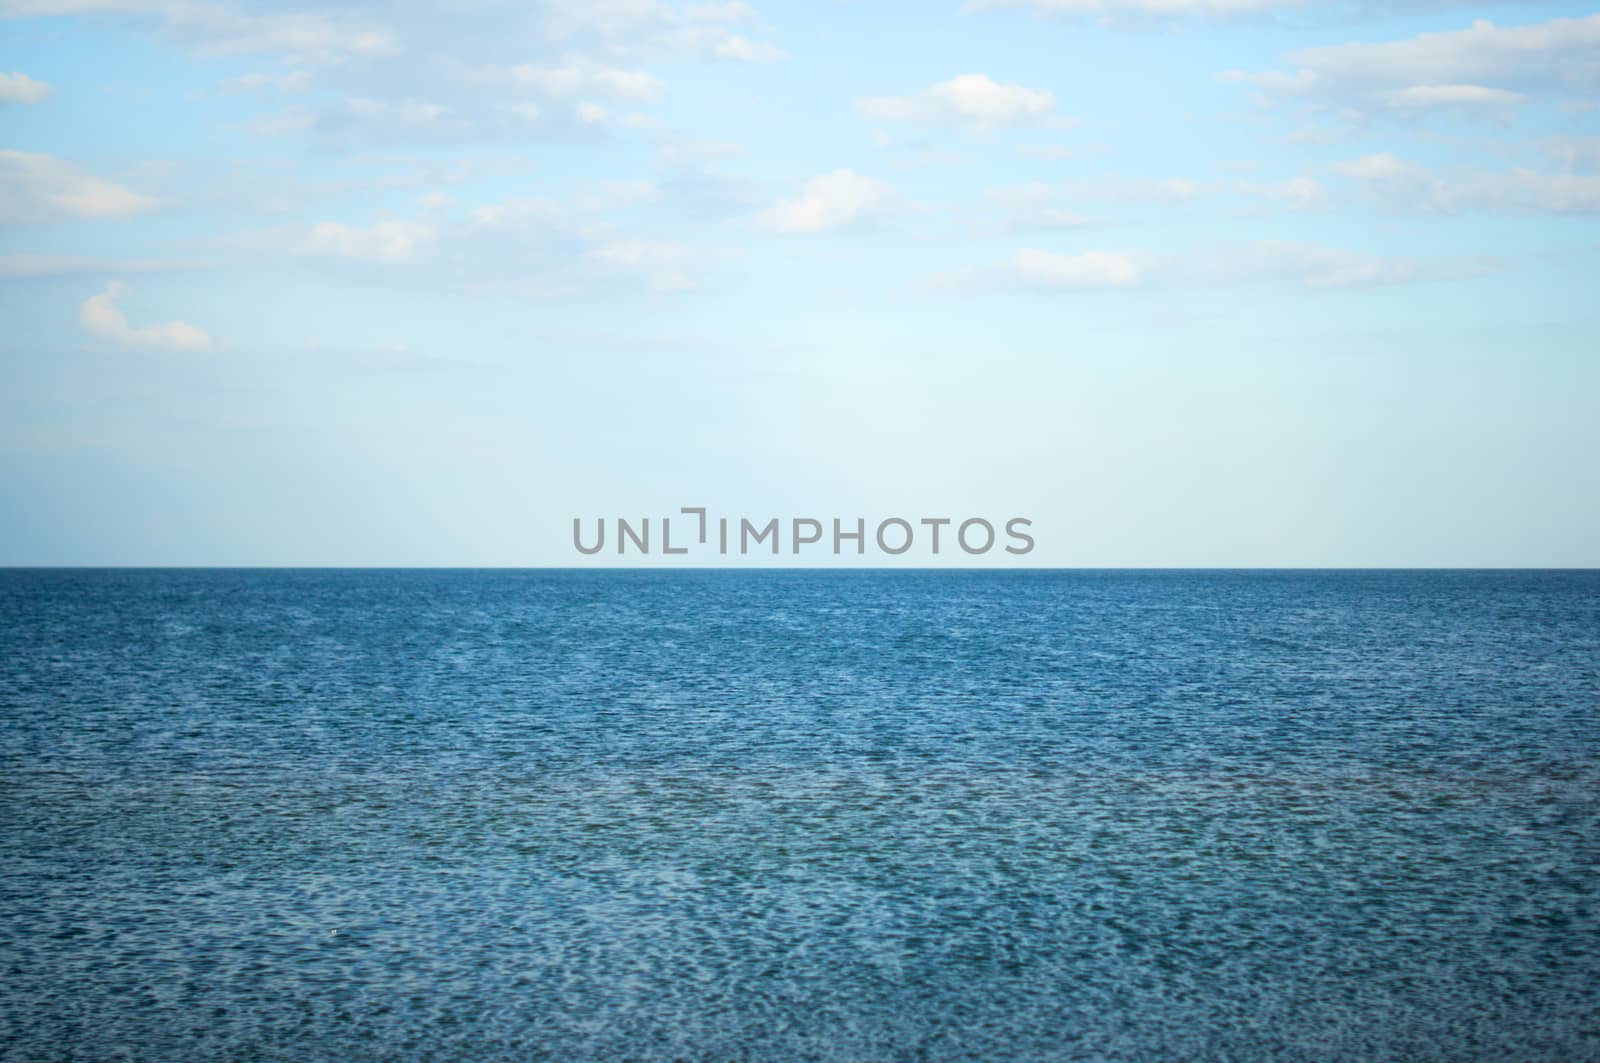 blue sea and cloudy sky over it. For your commercial and editorial use.